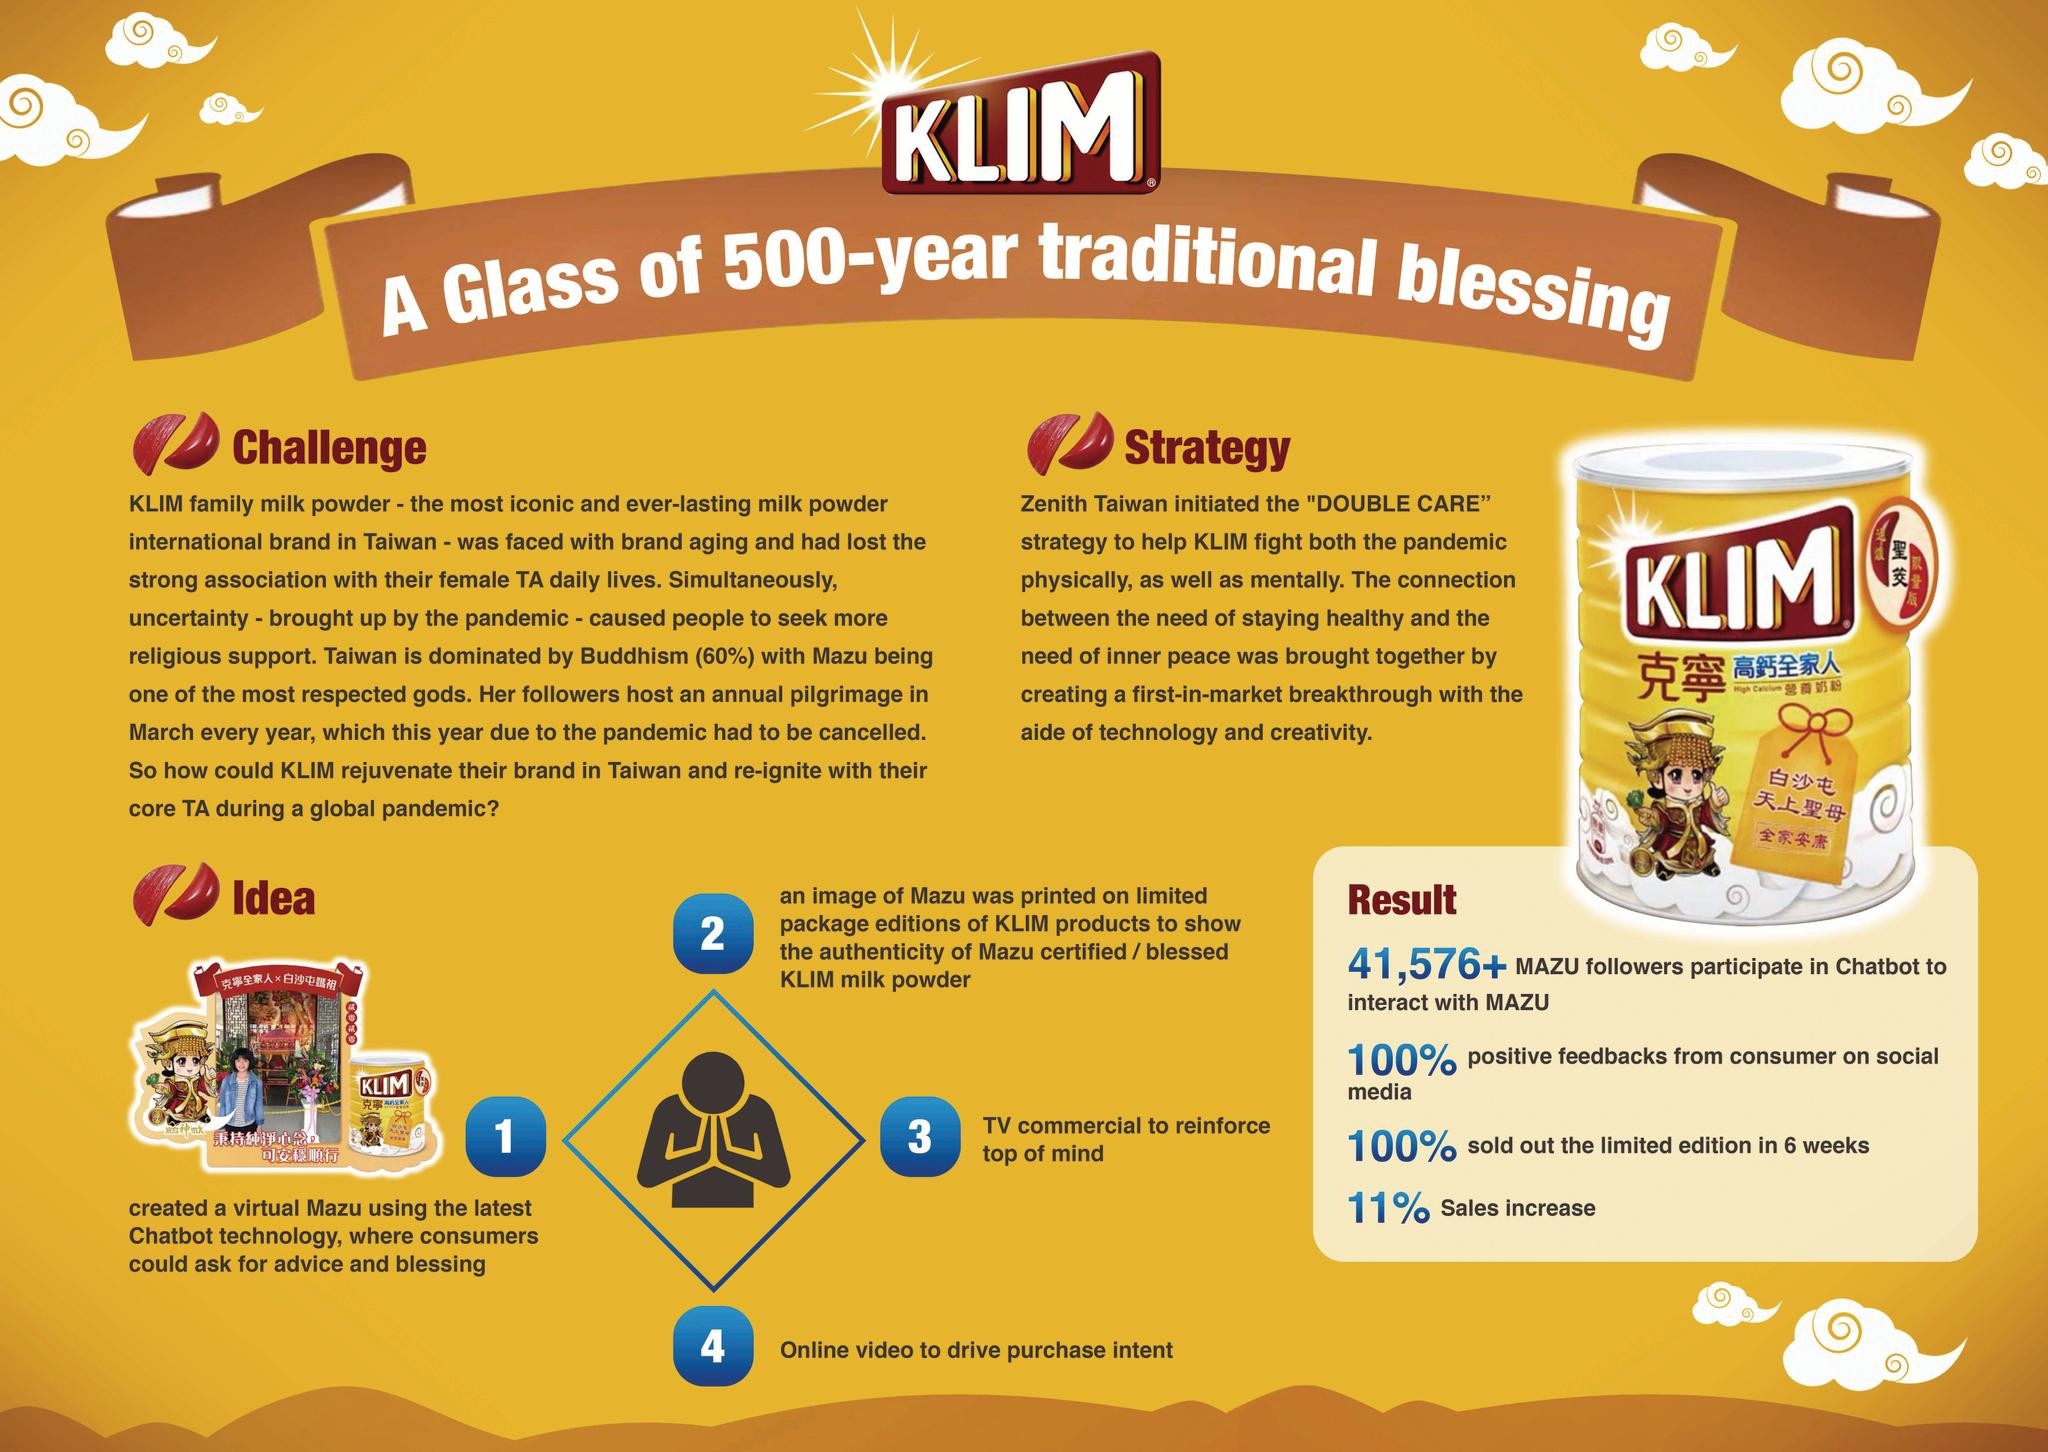 A glass of 500-year traditional blessing